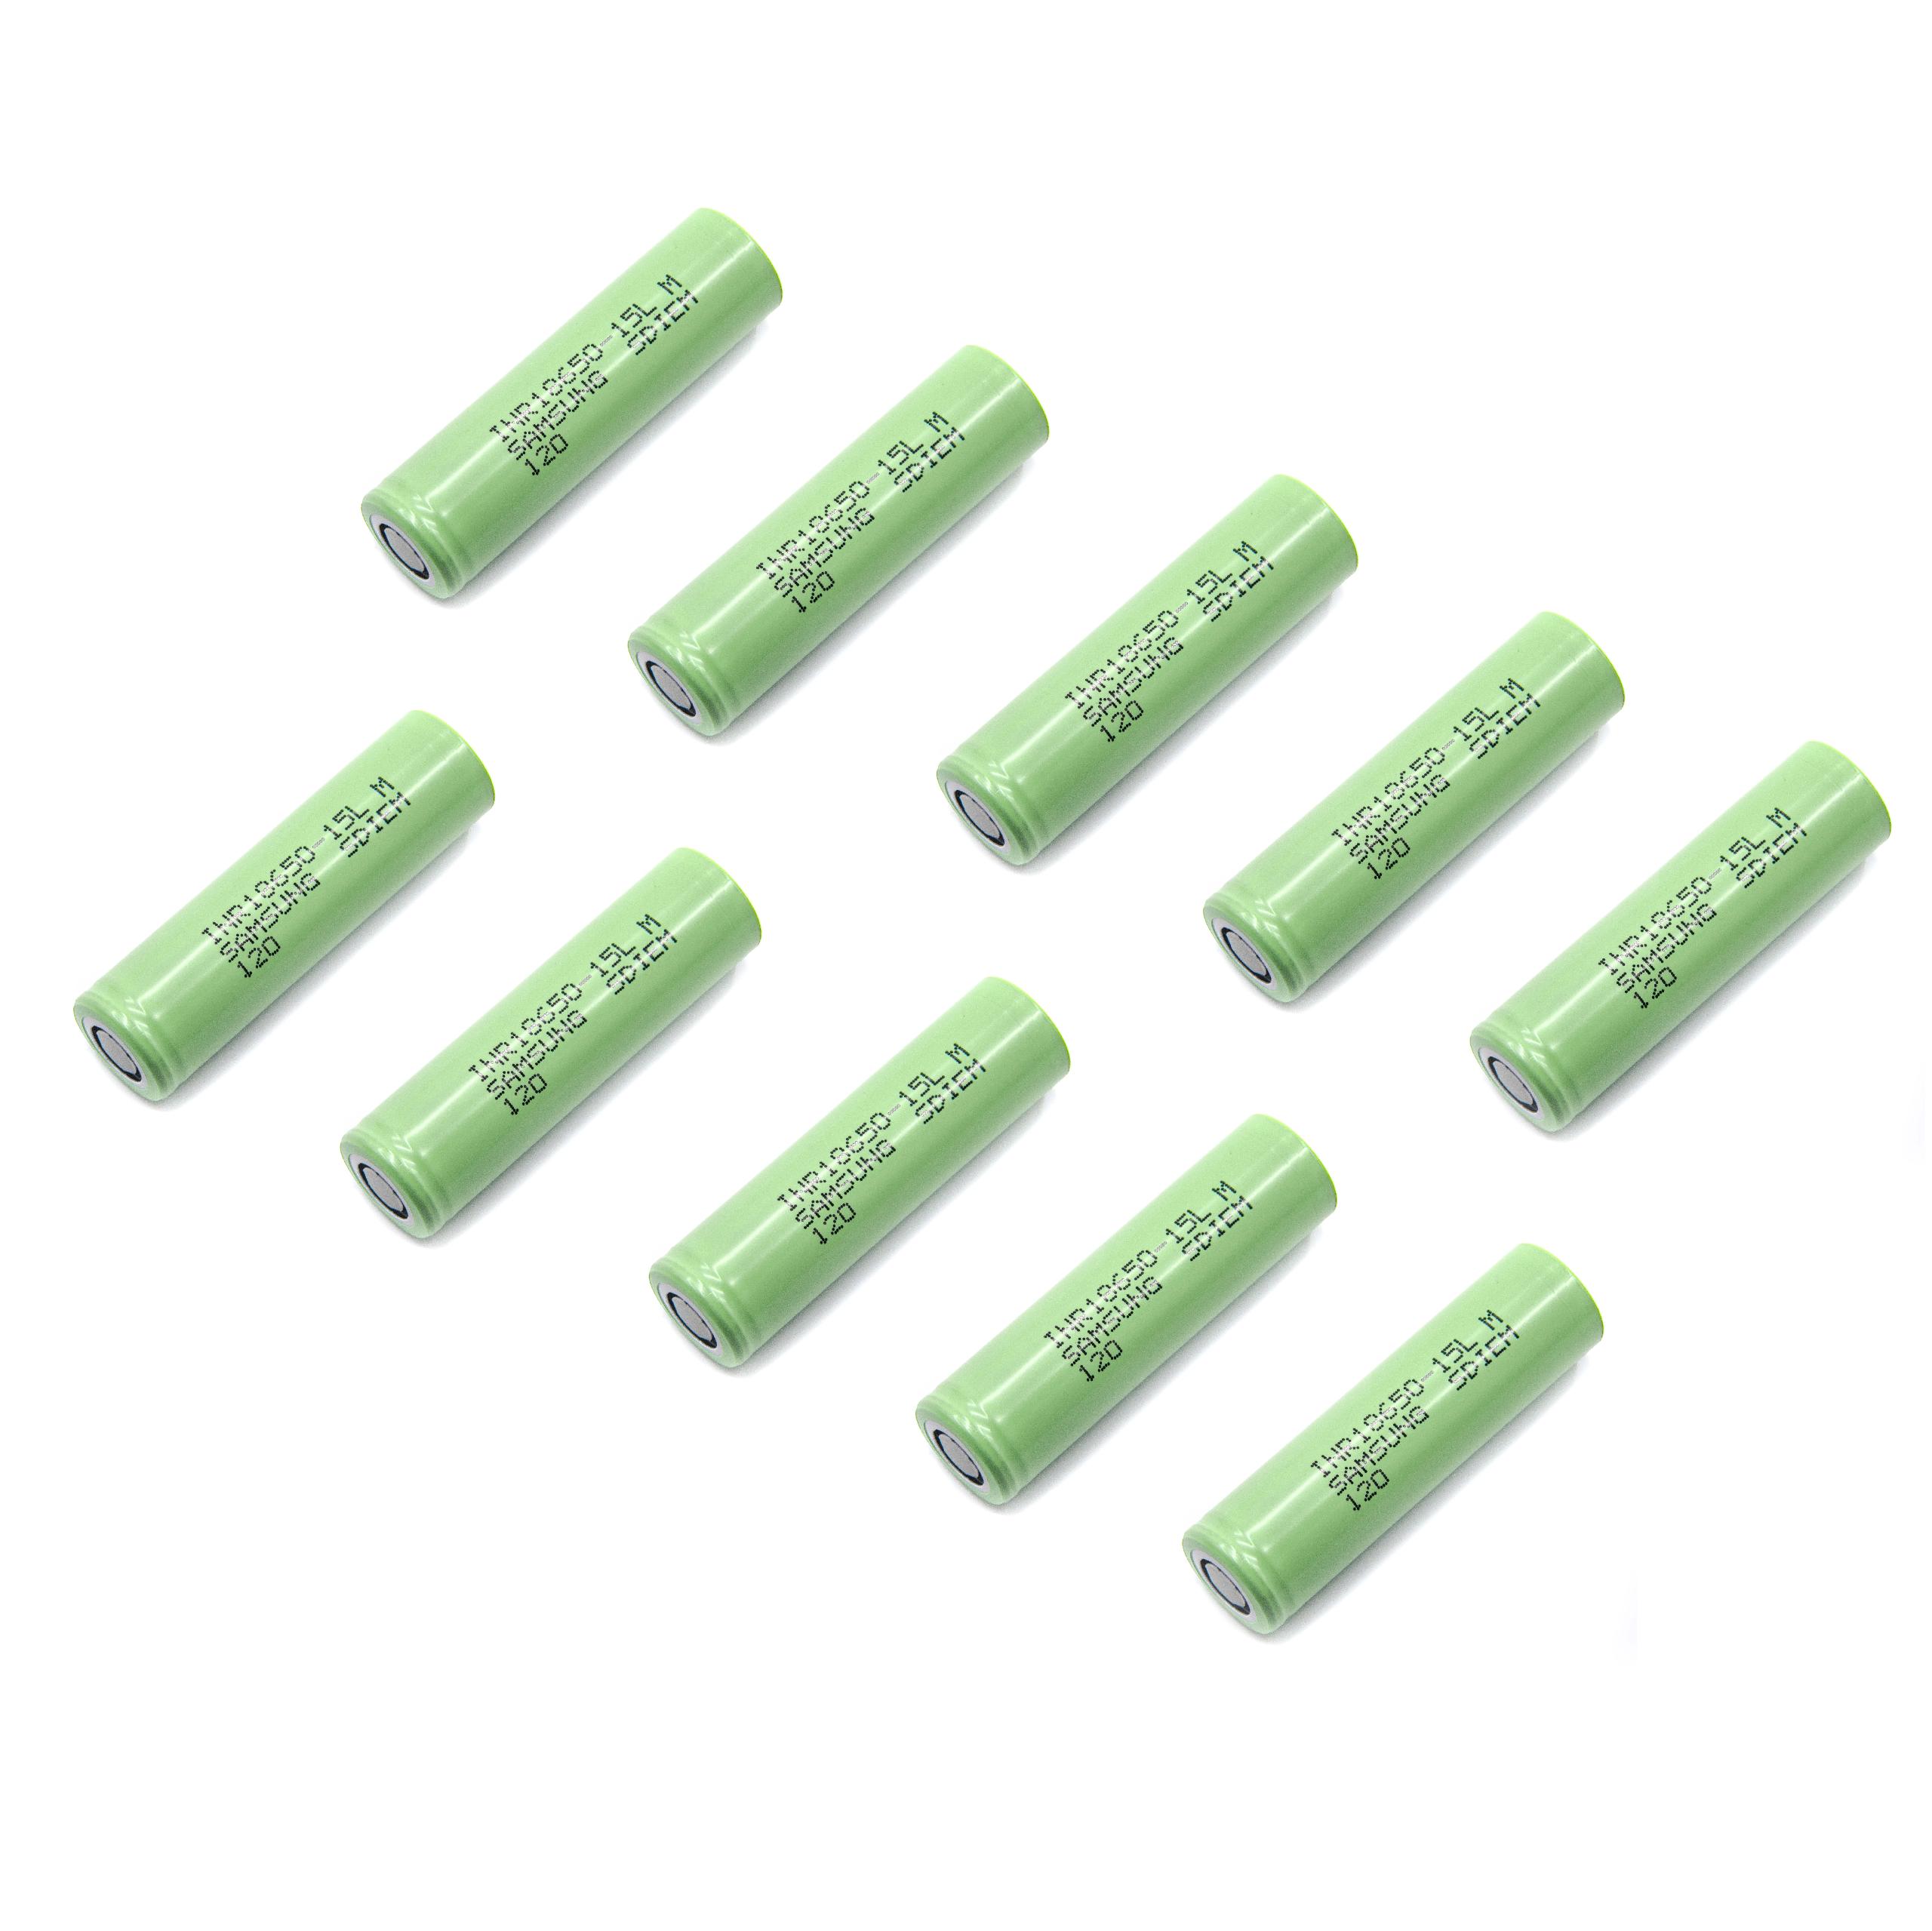 Raw Battery Cells (10 Piece) for Rechargeable Batteries - 1500mAh 3.6V LiNiMnCoO2